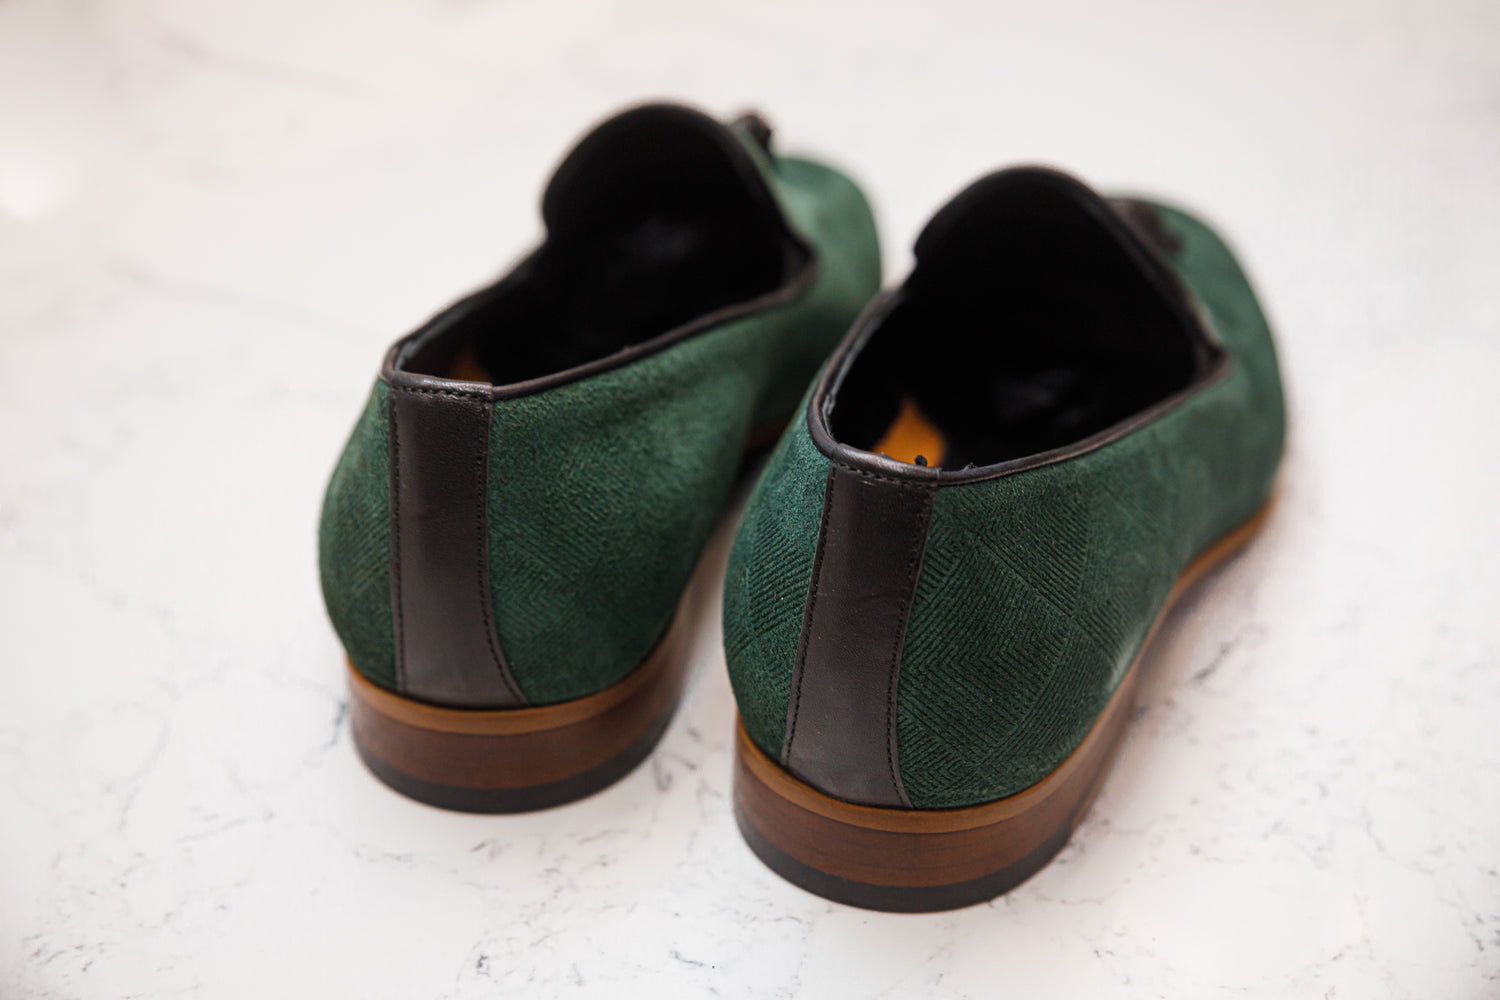 The Diamanté Suede Loafers - Emerald Green - Loafers by Urbbana